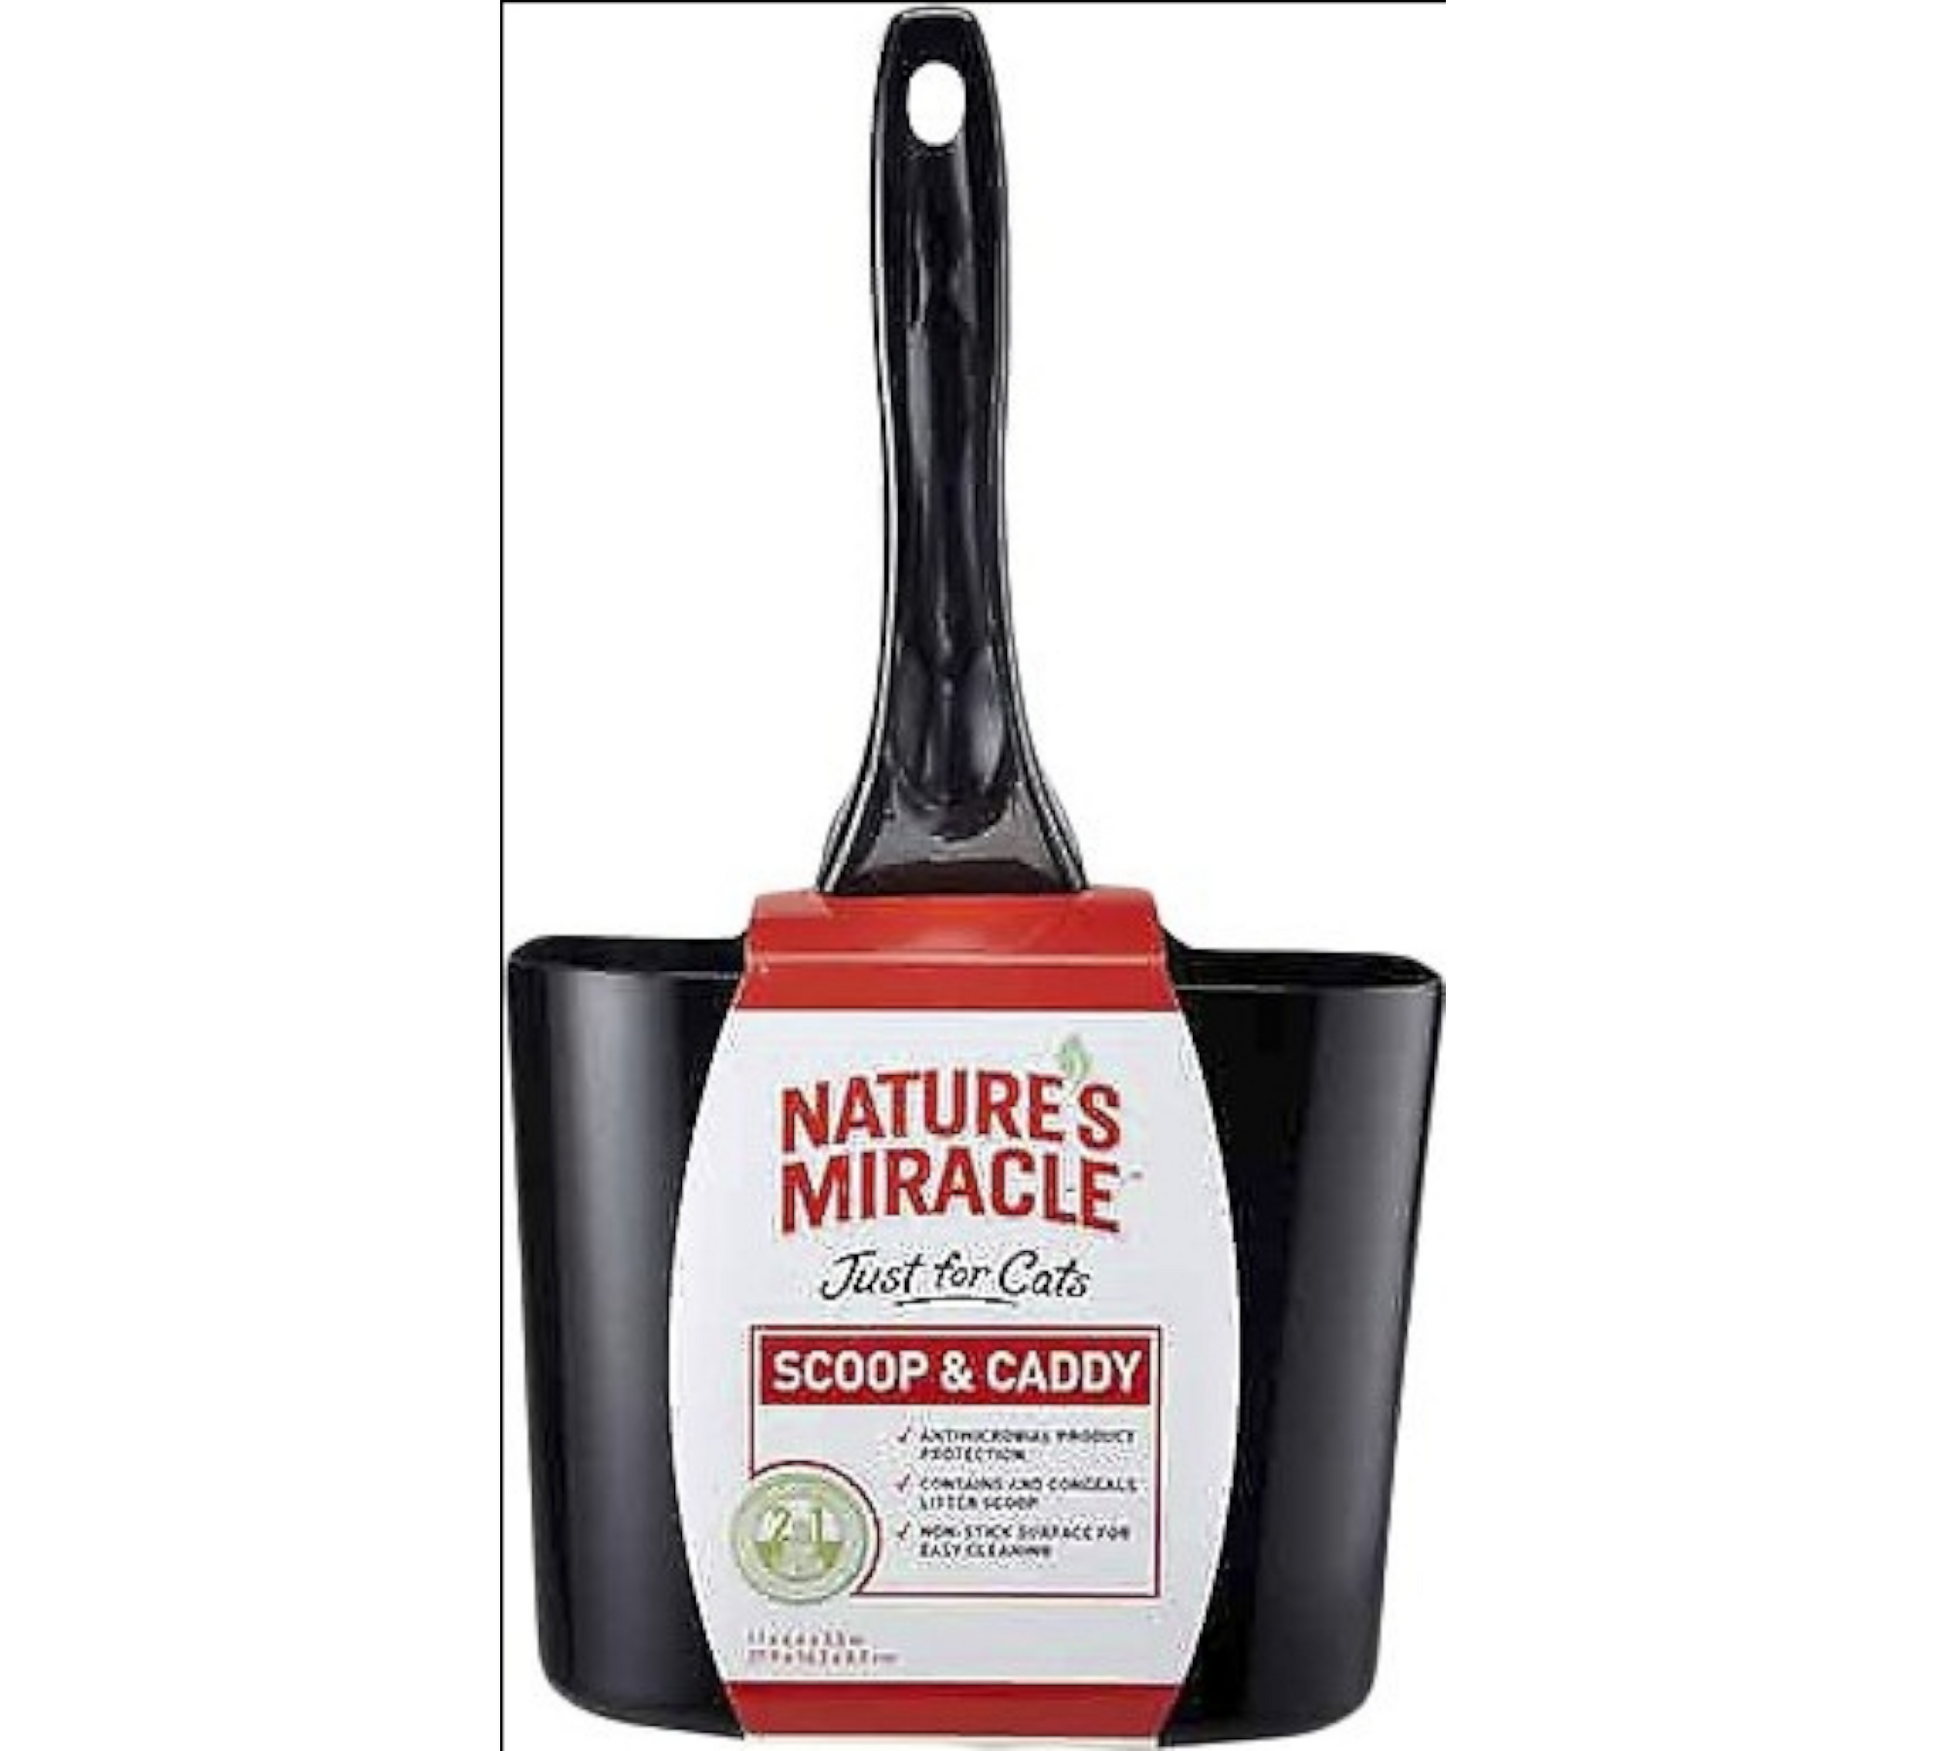 Canine's World Cat Litter Scoops Nature's Miracle Just For Cats Litter Scoop & Caddy Natures Miracle